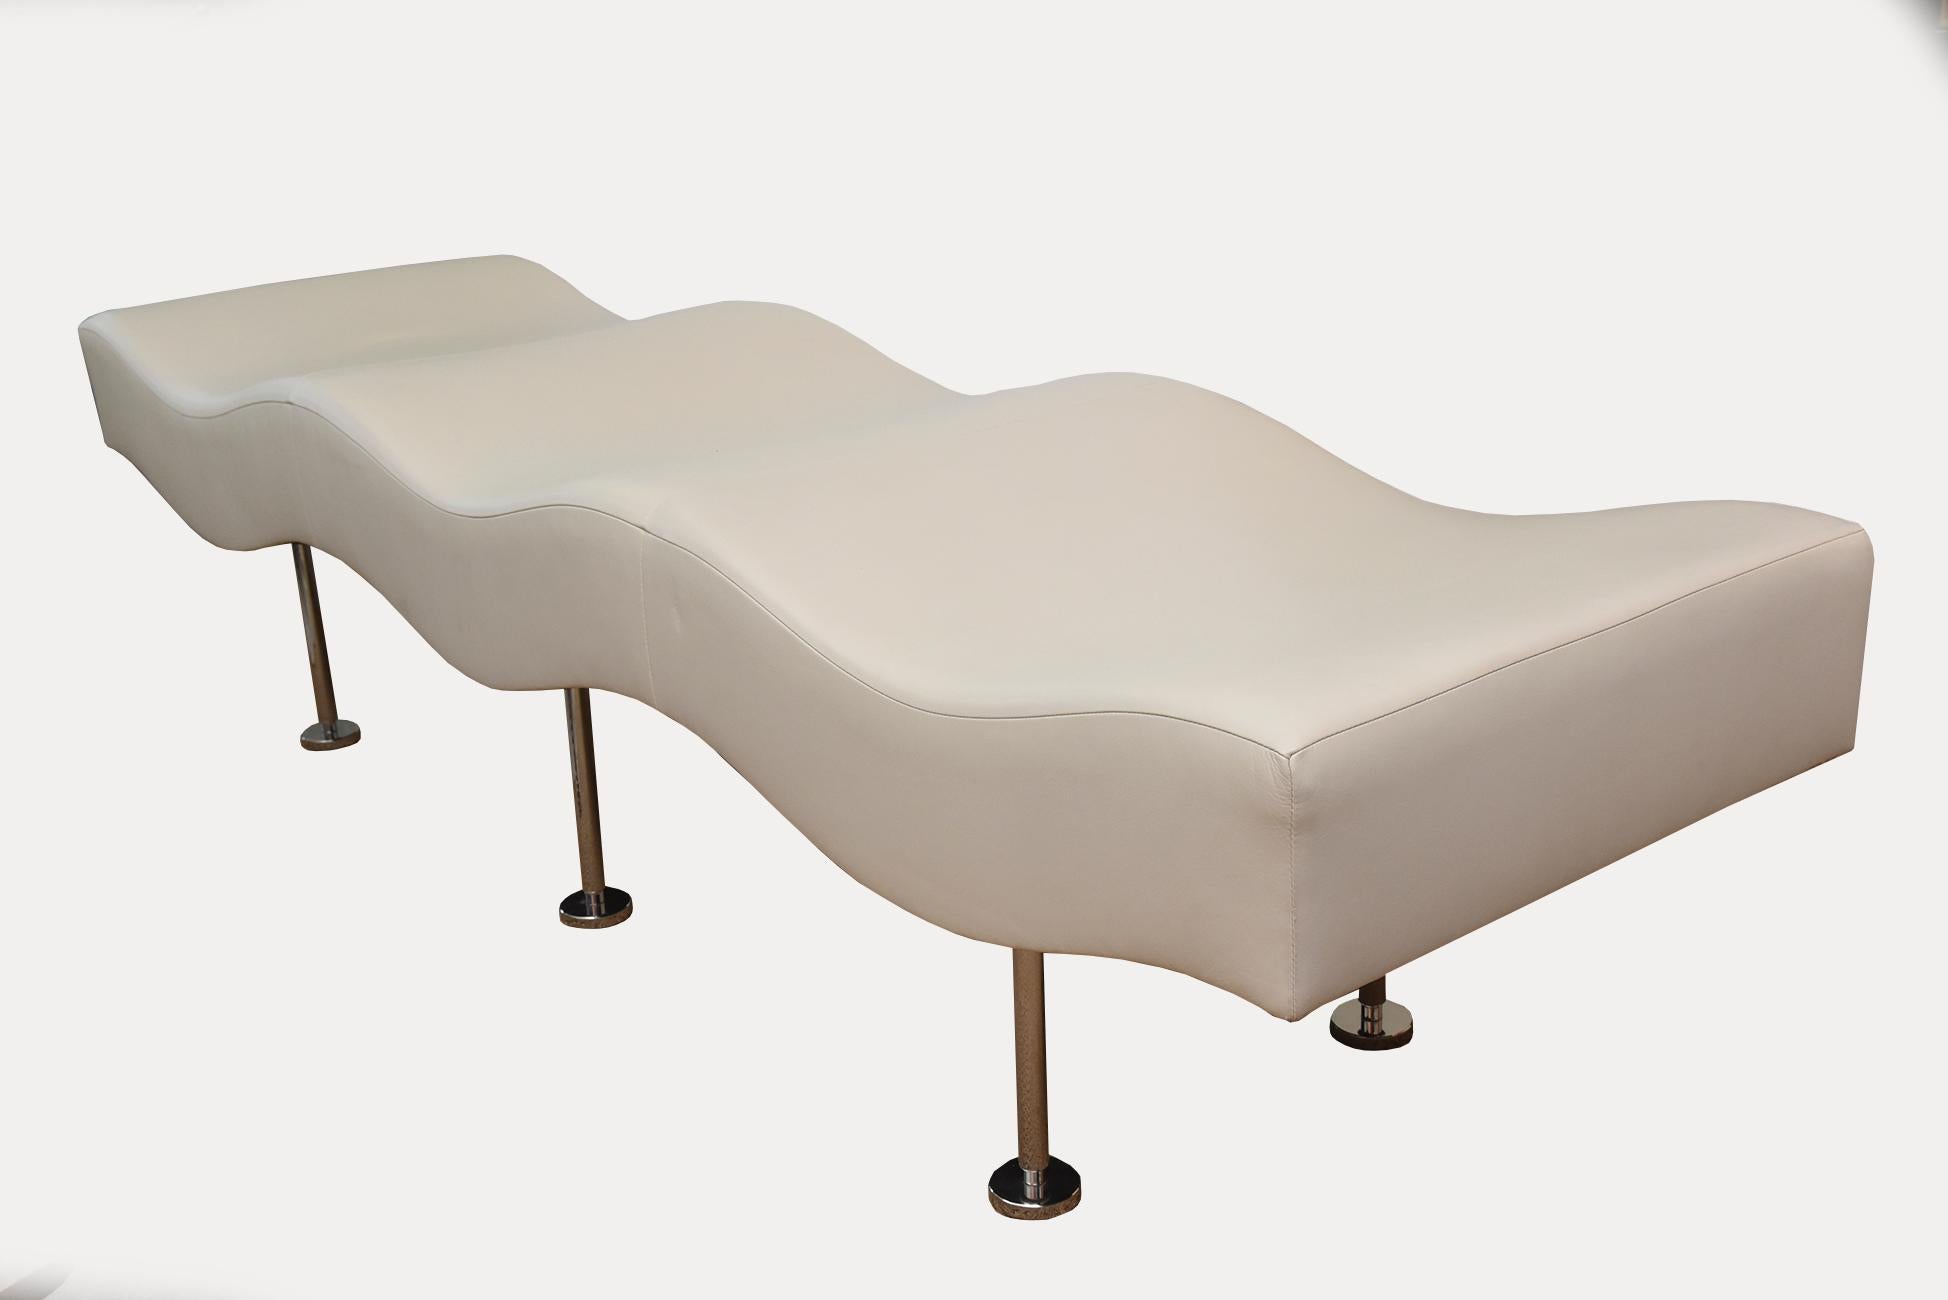 Vintage Brueton Undulatus Wave Bench with Stainless Steel Legs Tan Leather Top For Sale 6